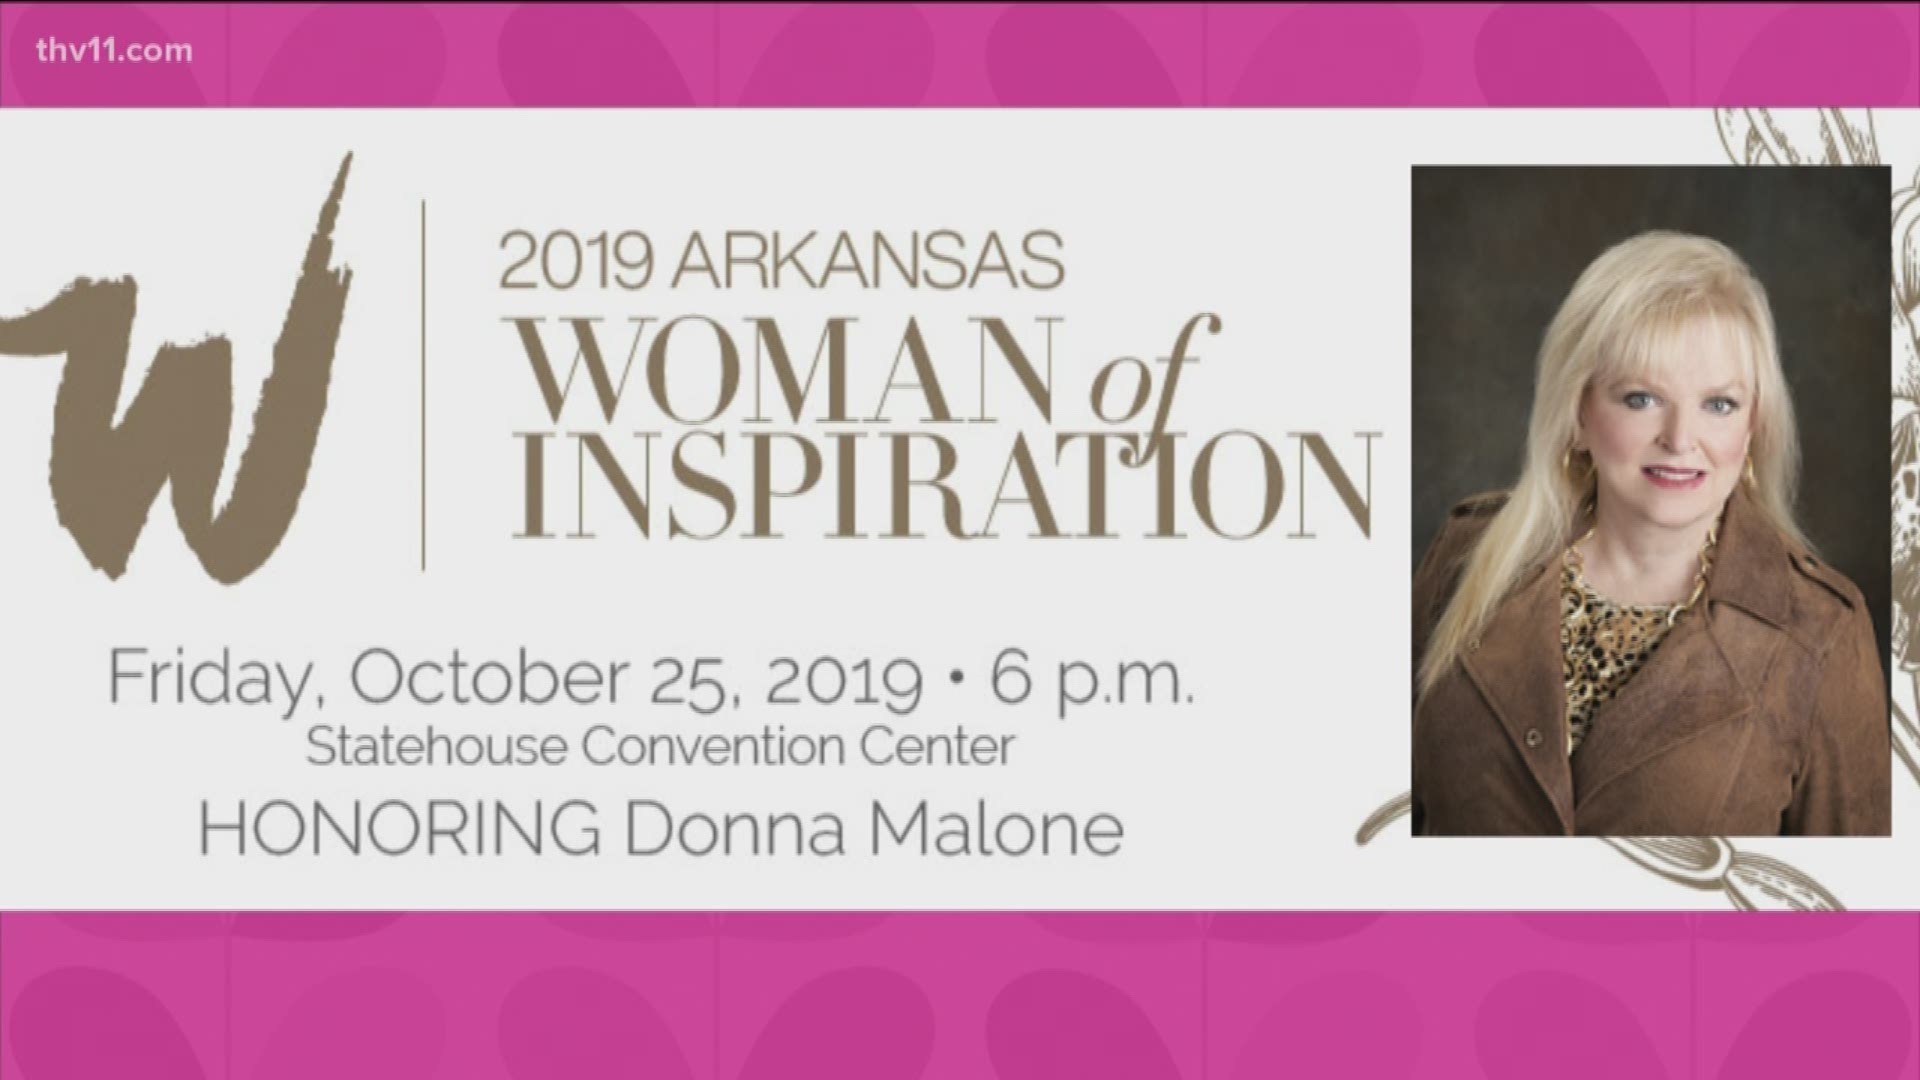 2019 Arkansas Woman of Inspiration event at the Statehouse Convention Center on October 25th to benefit Children's Advocacy Centers of Arkansas.